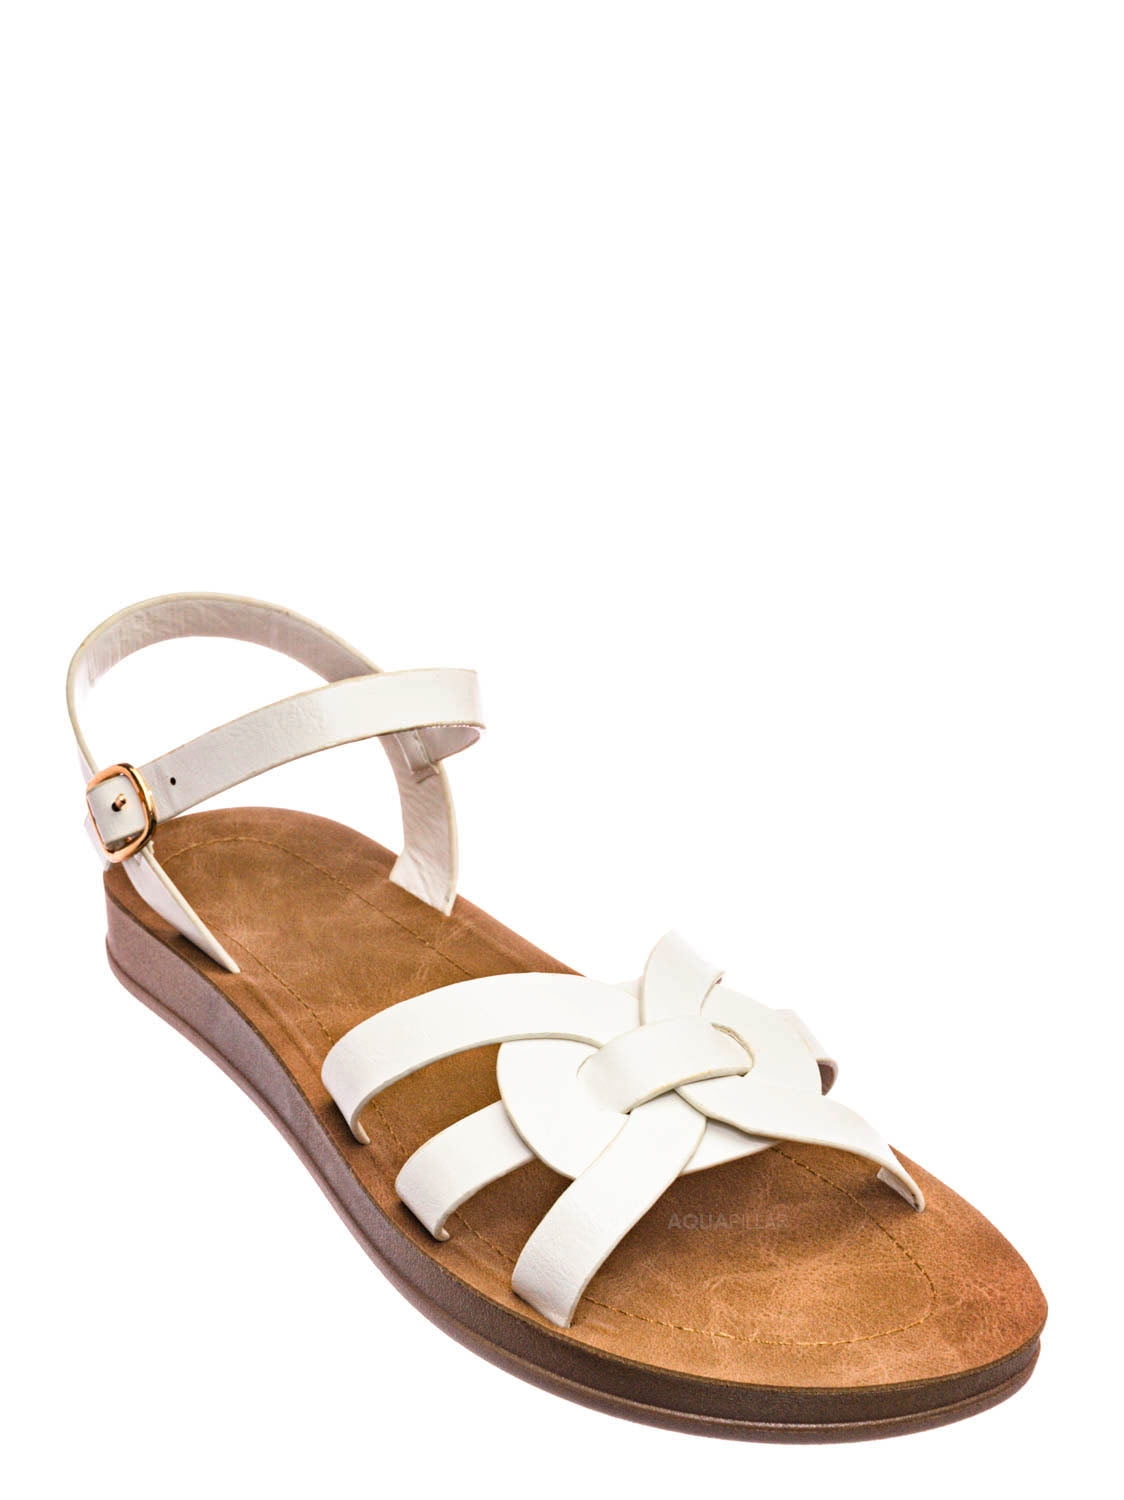 Bamboo - Marmie32 by Bamboo, Ankle Strap Flexible Sandal - Women ...